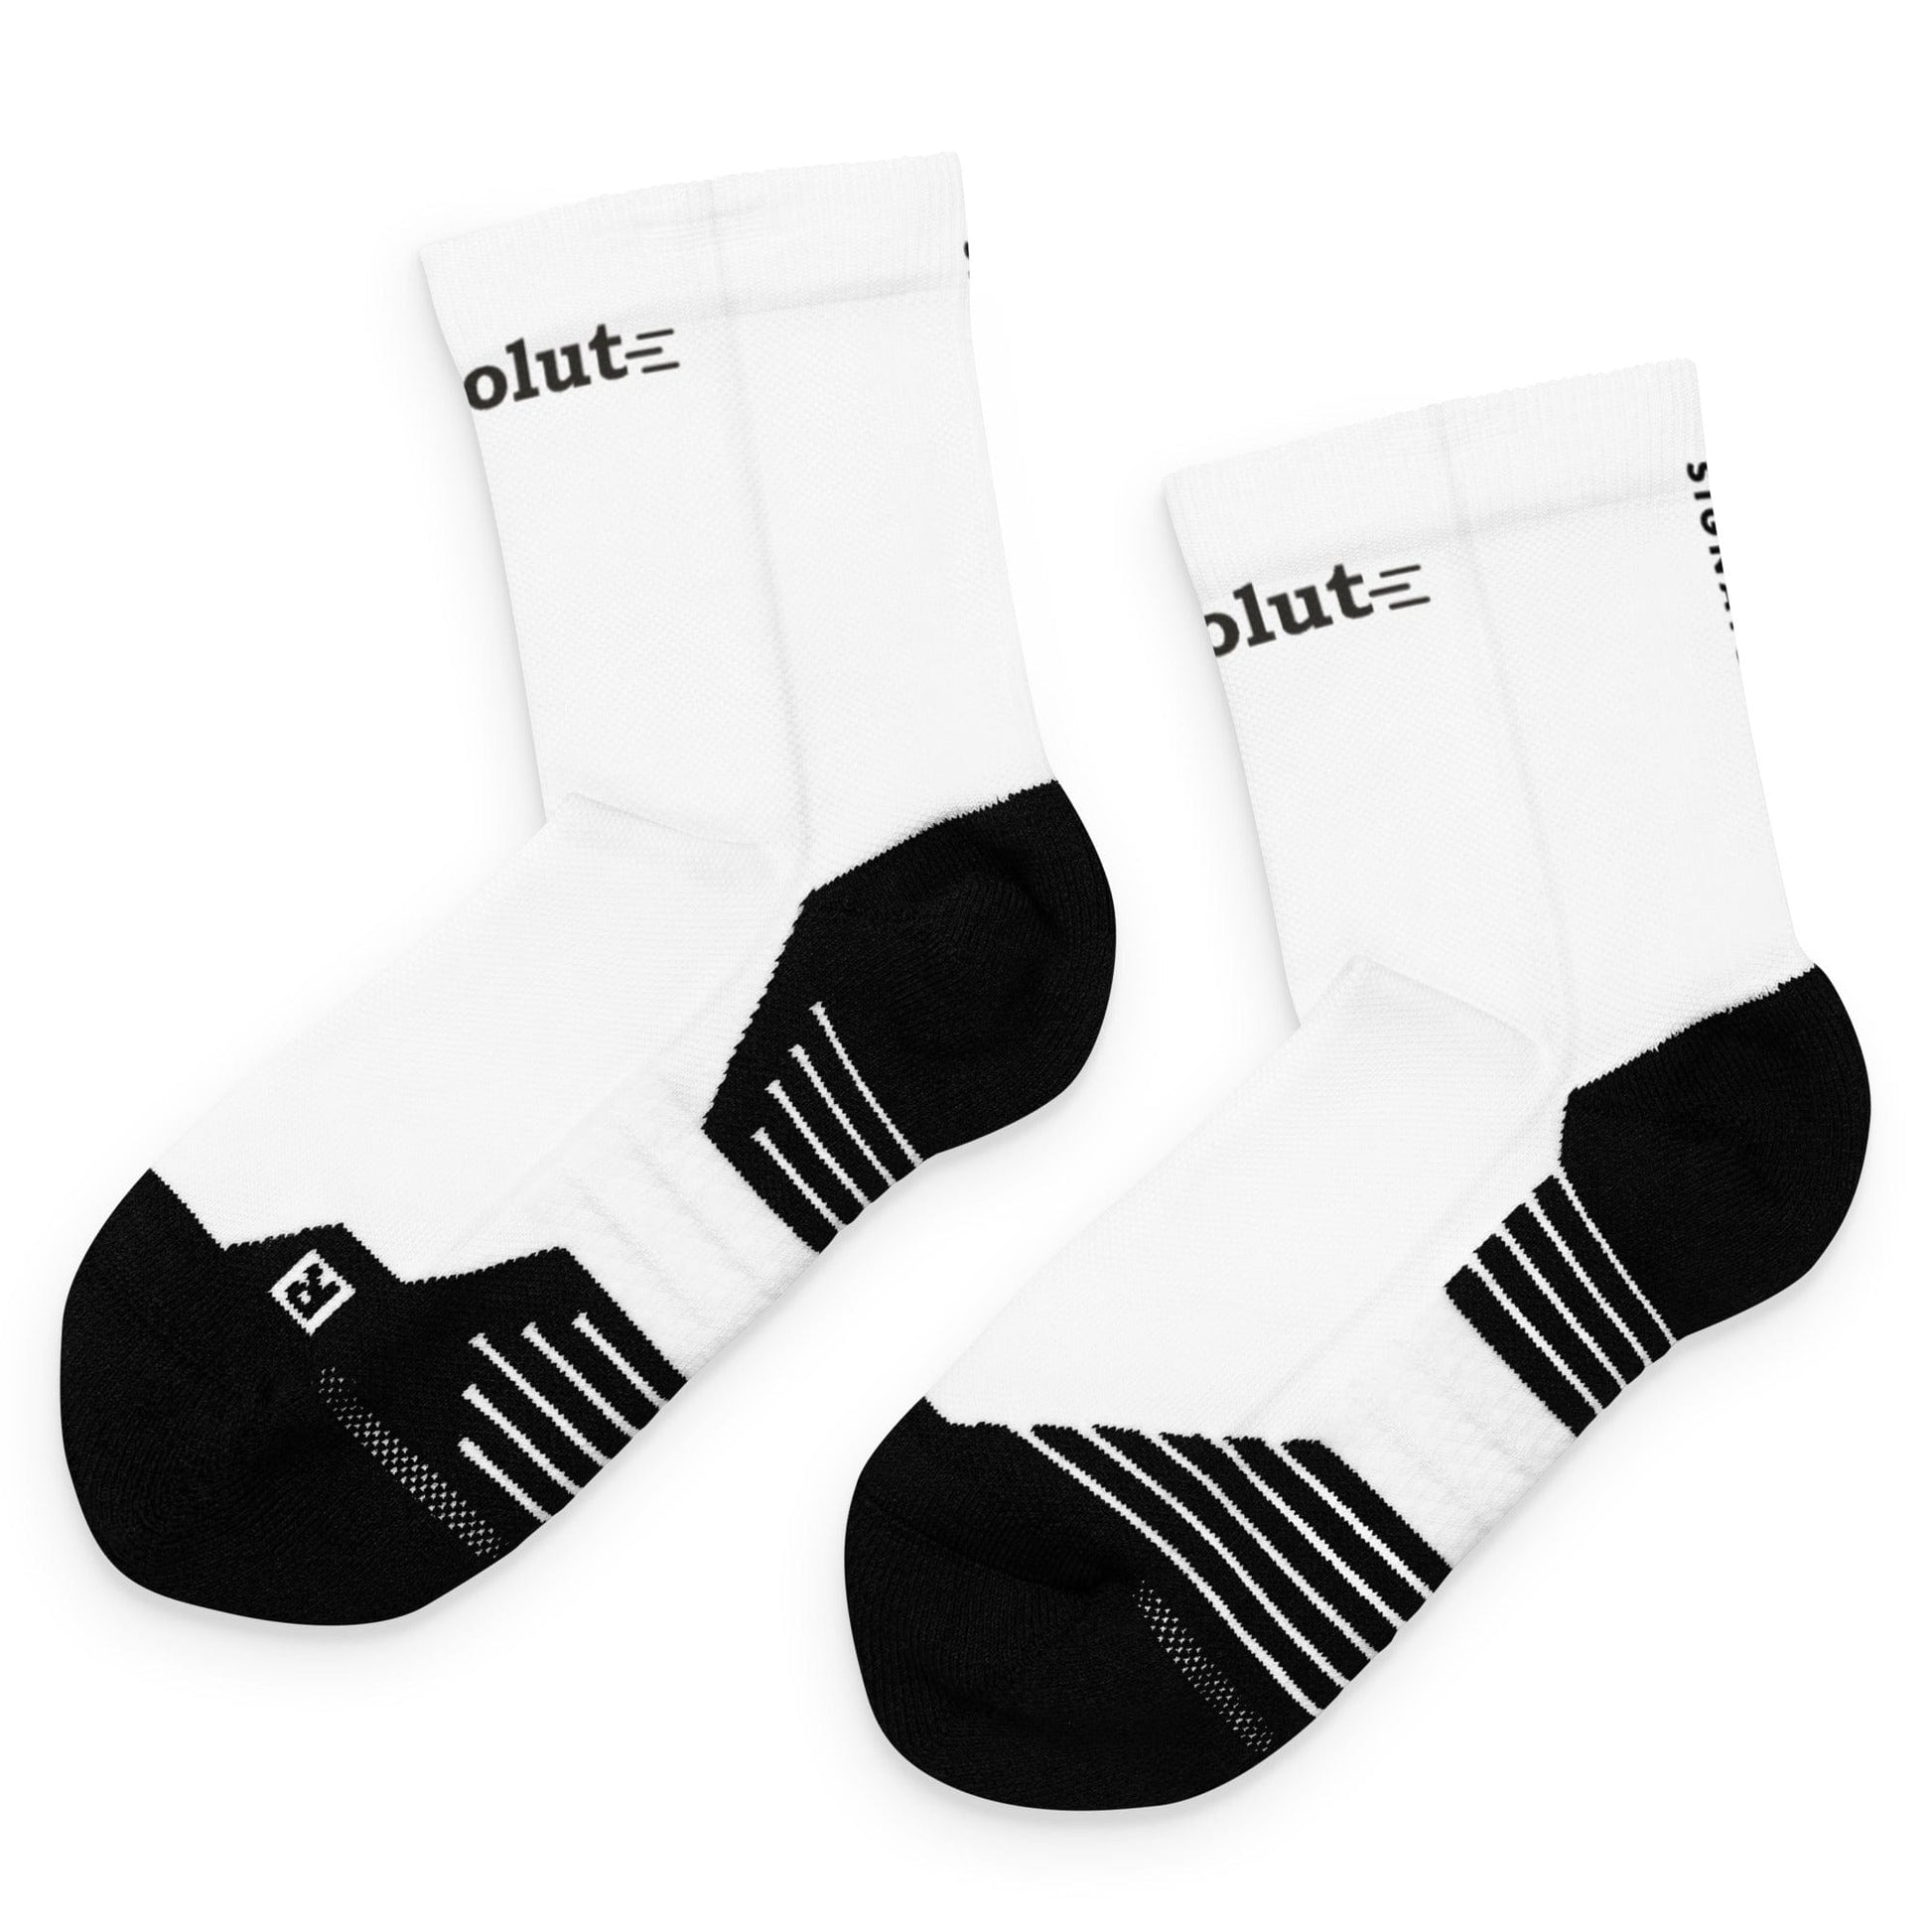 Resolute Athletic Complex Ankle High Athletic Socks Signature Lacrosse